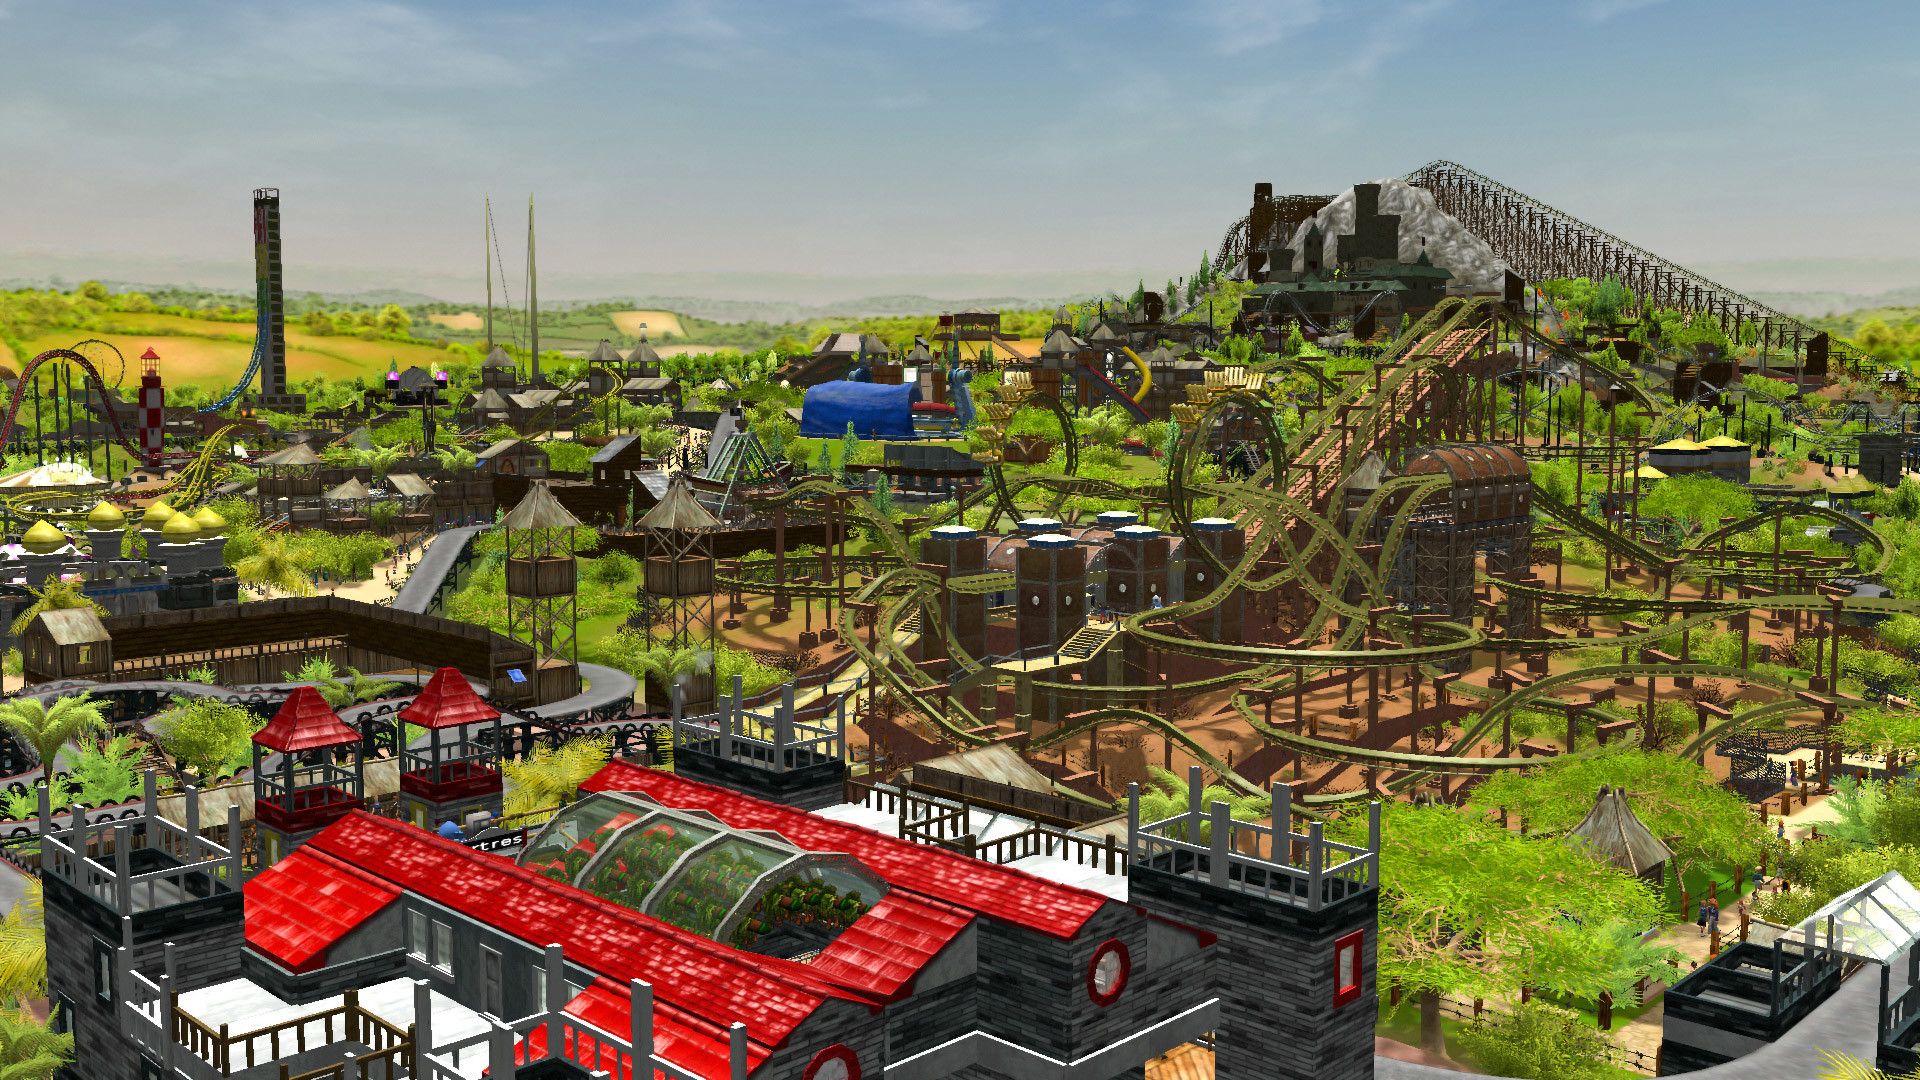 Roller Coaster Tycoon 3 Complete Edition Review 